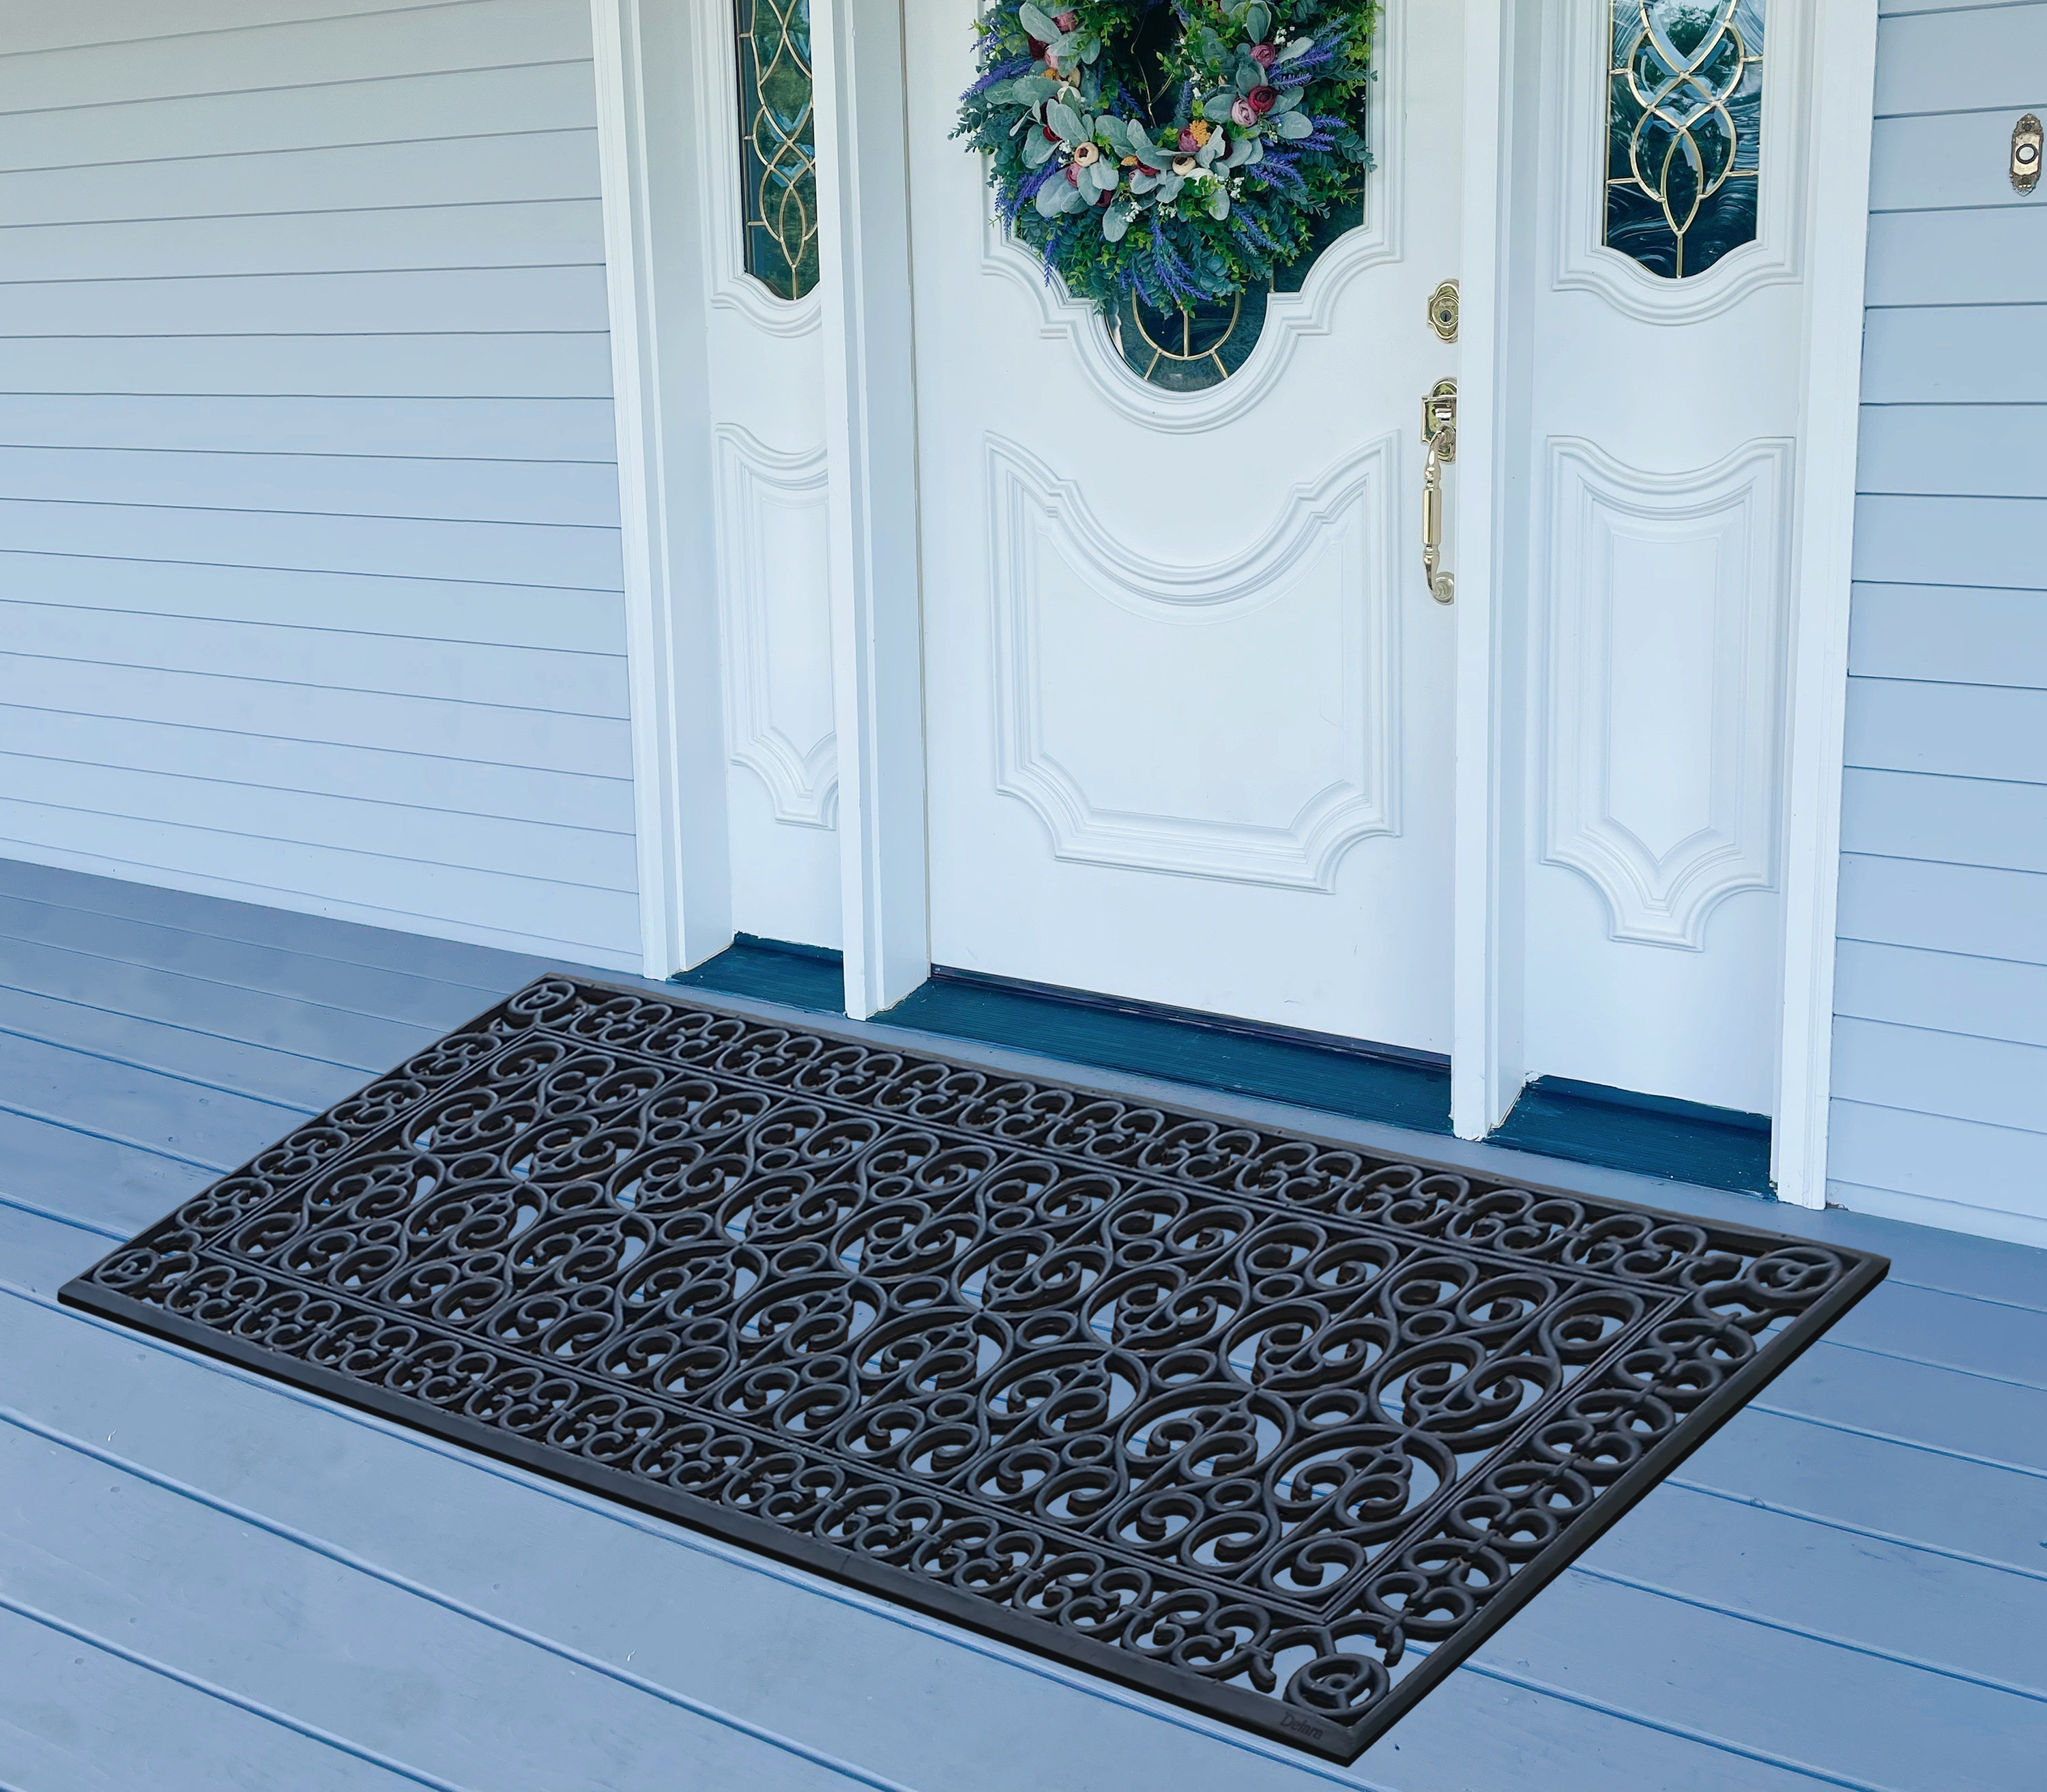 Darby Home Co Lykens A1HC Large Door Mat, Natural Rubber, Ideal